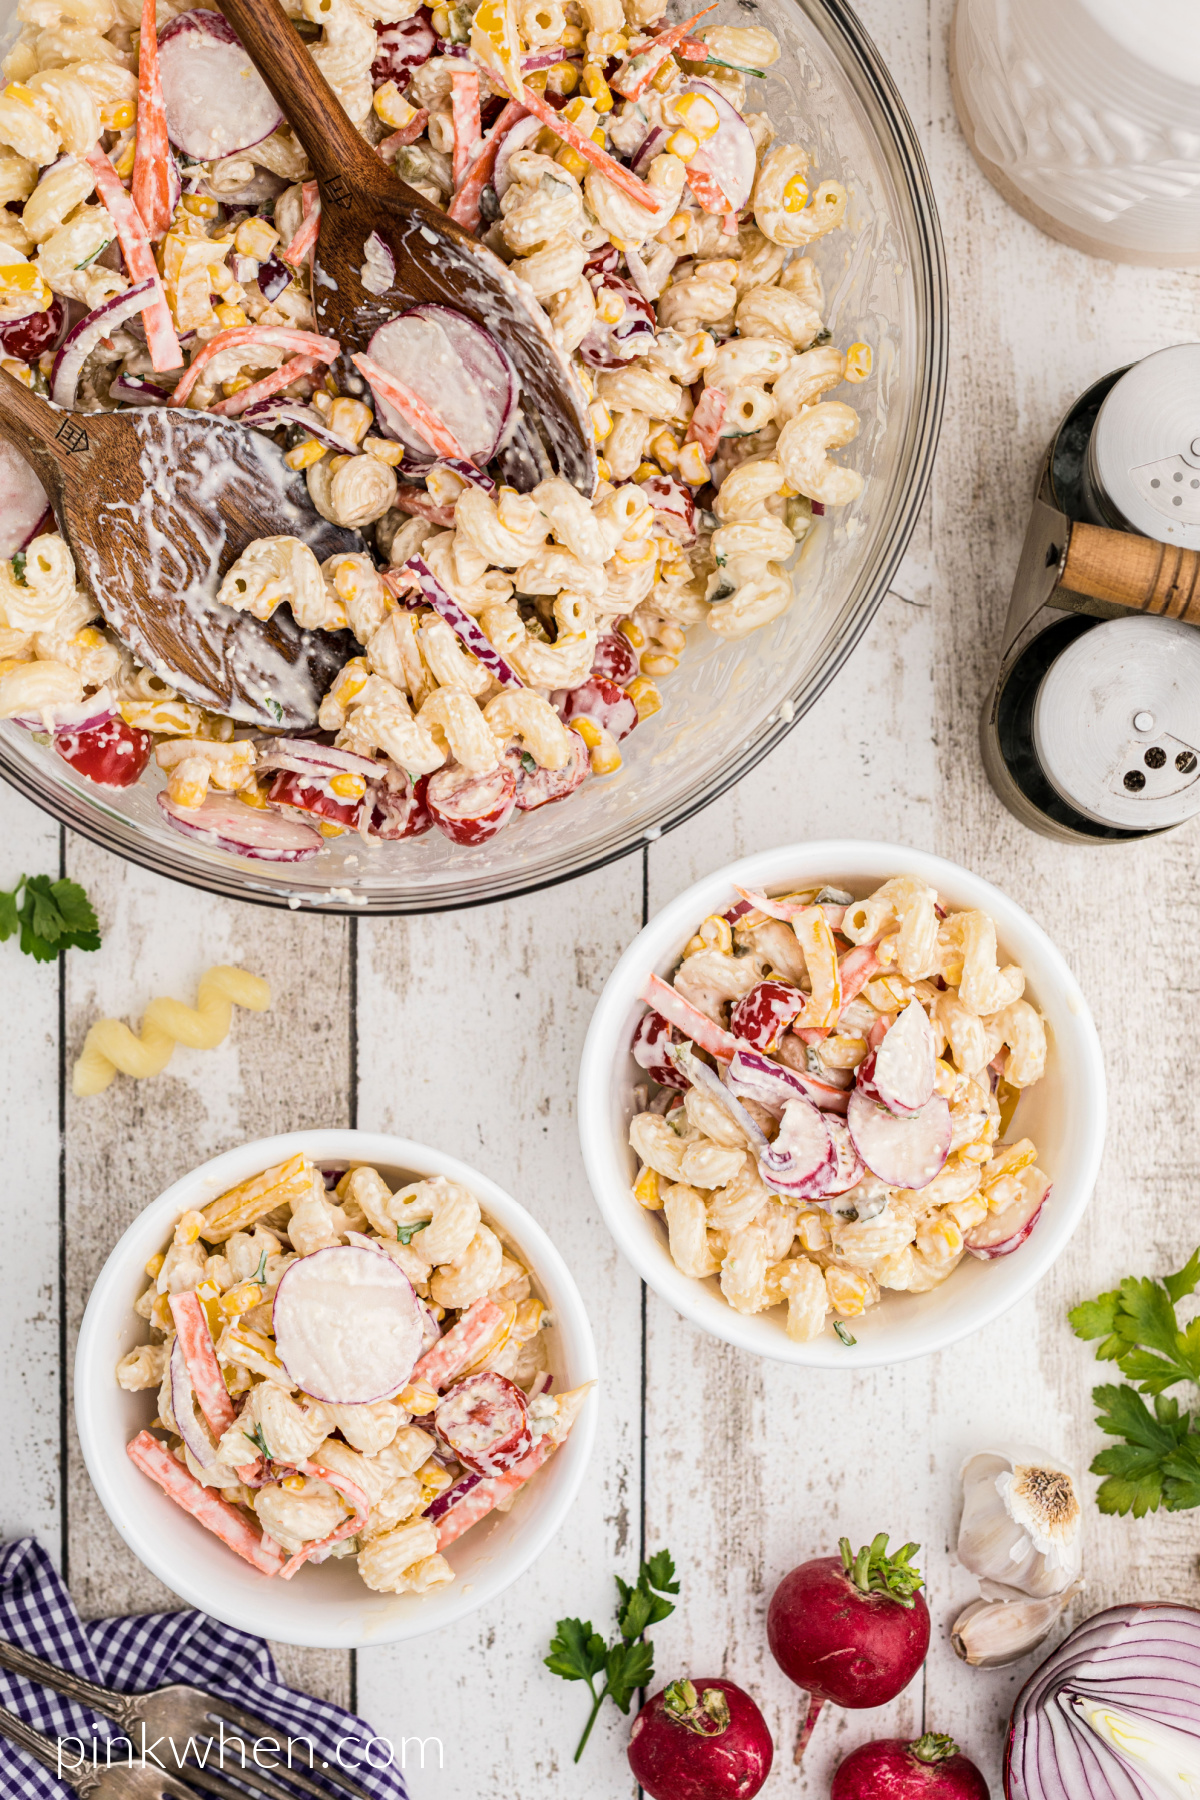 Summer Pasta salad in bowls on a table, ready to serve.